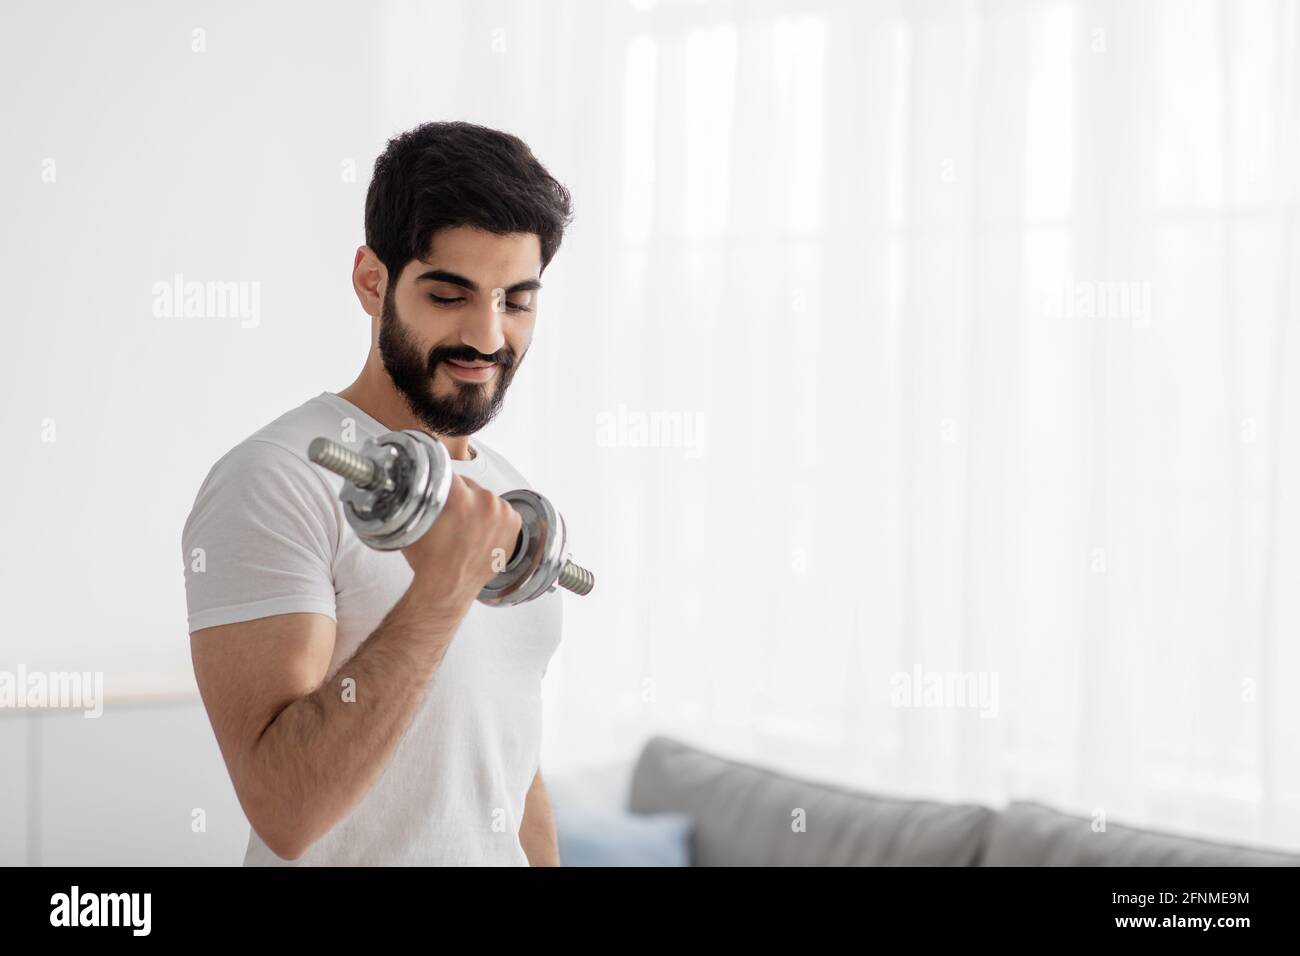 Equipment for strength training at home during covid quarantine Stock Photo